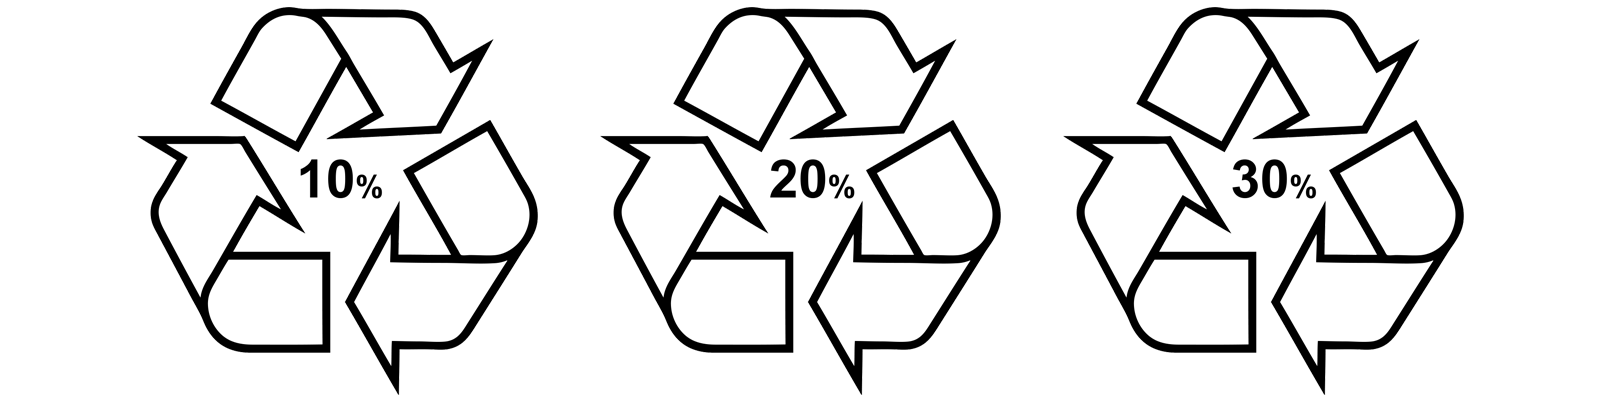 Recycling logos with percentages - 10%, 20%, and 30%